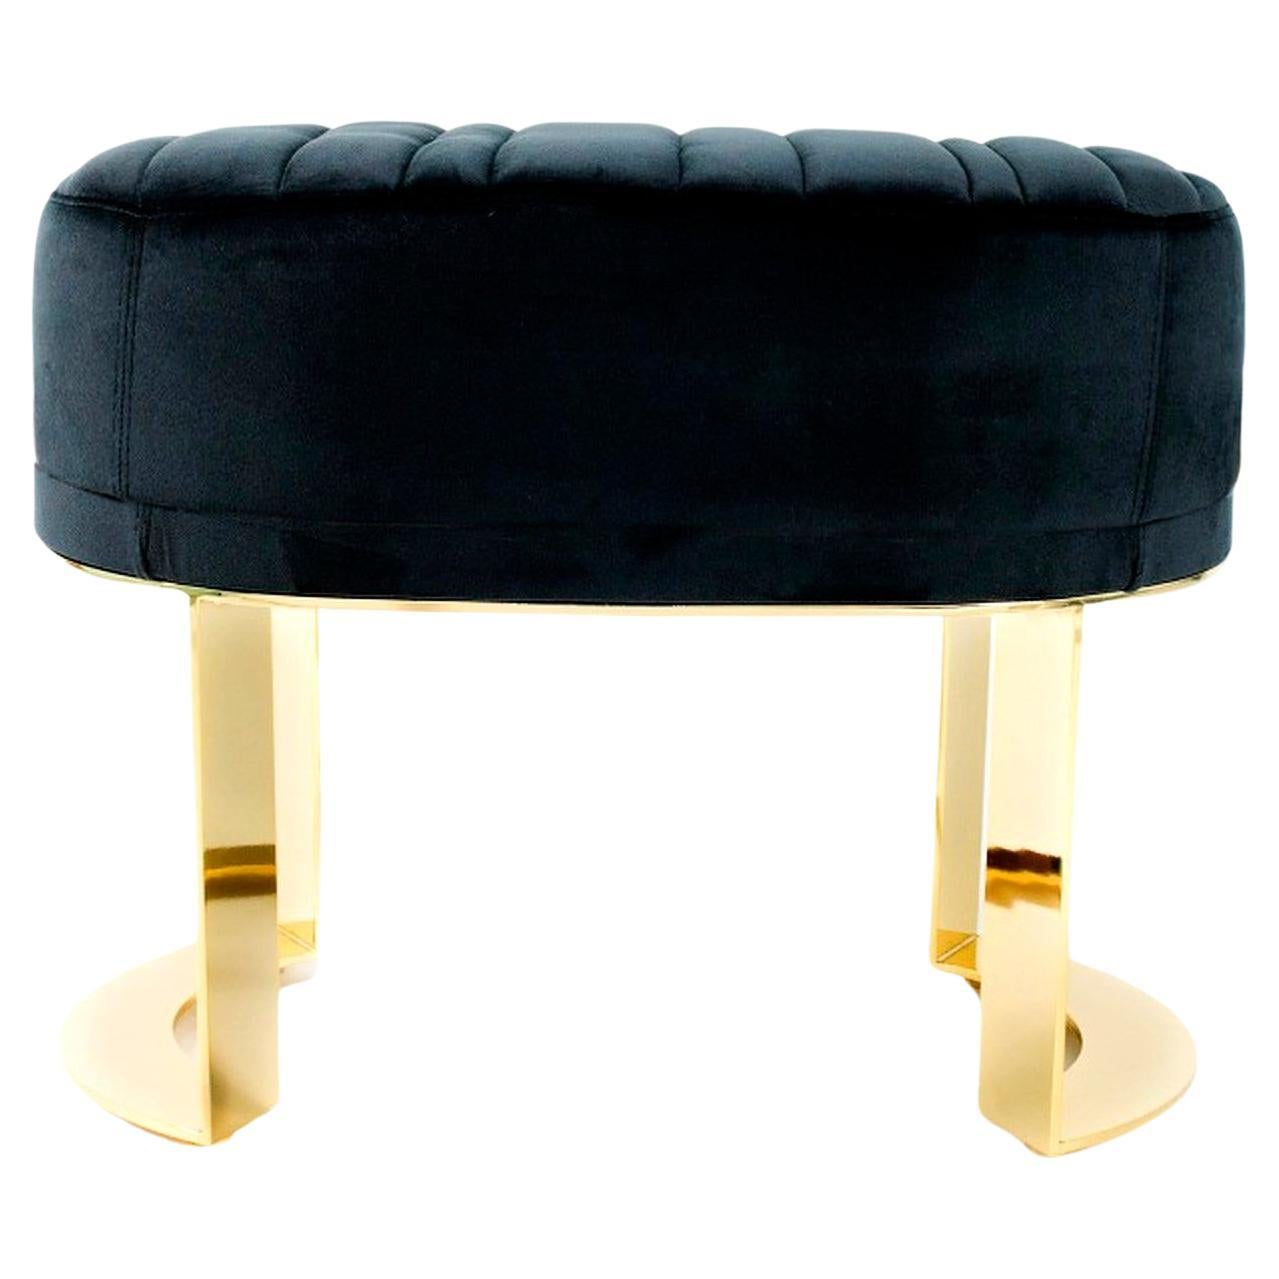 Upholstered Stool, Gold Plated Legs Bench For Sale